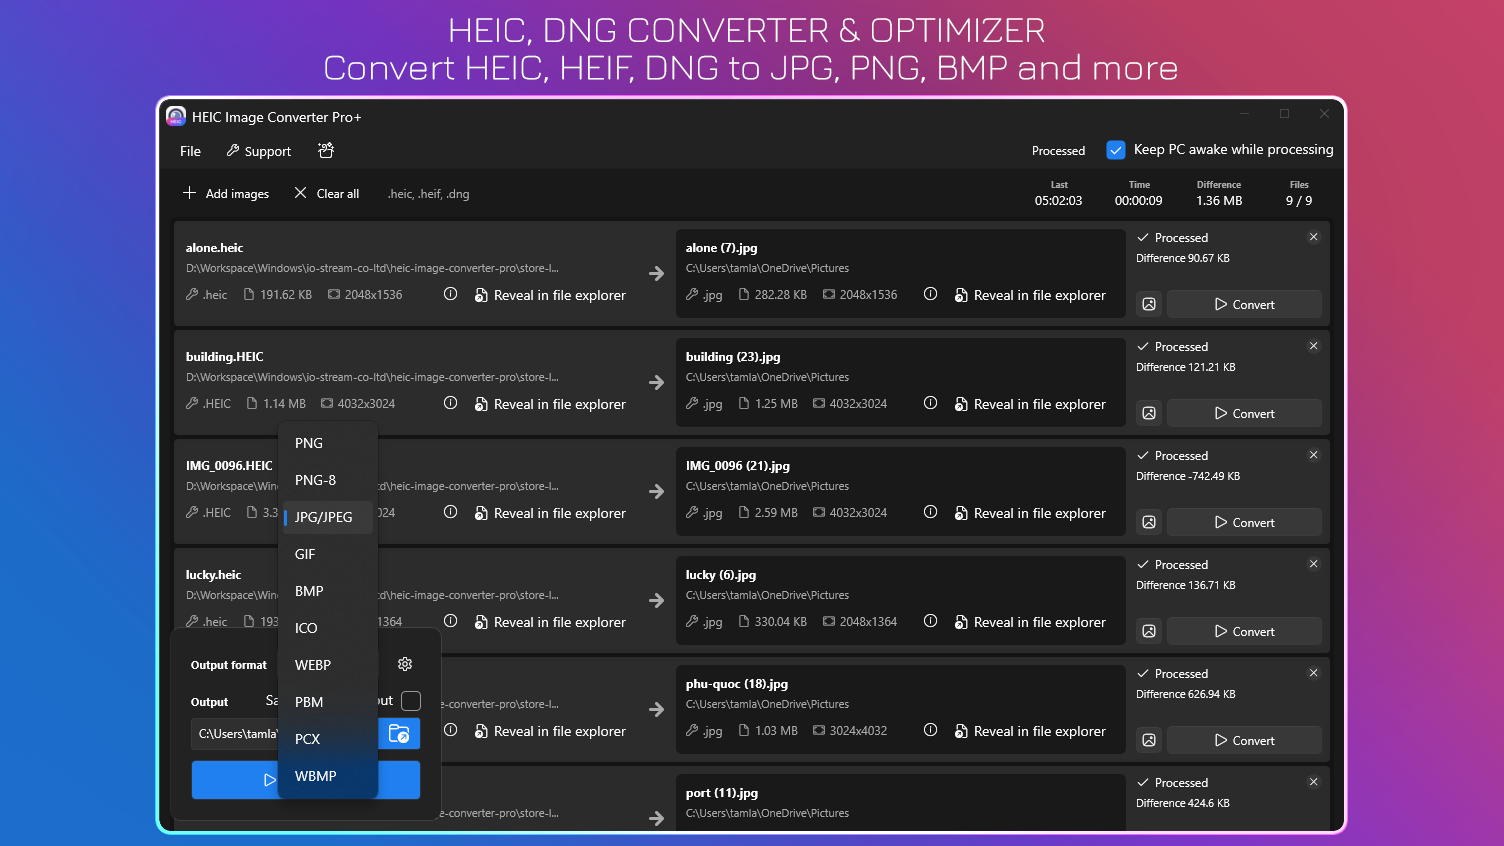 HEIC, DNG Image Converter & Optimizer - Convert HEIC, HEIF, DNG to JPG, PNG, BMP and more